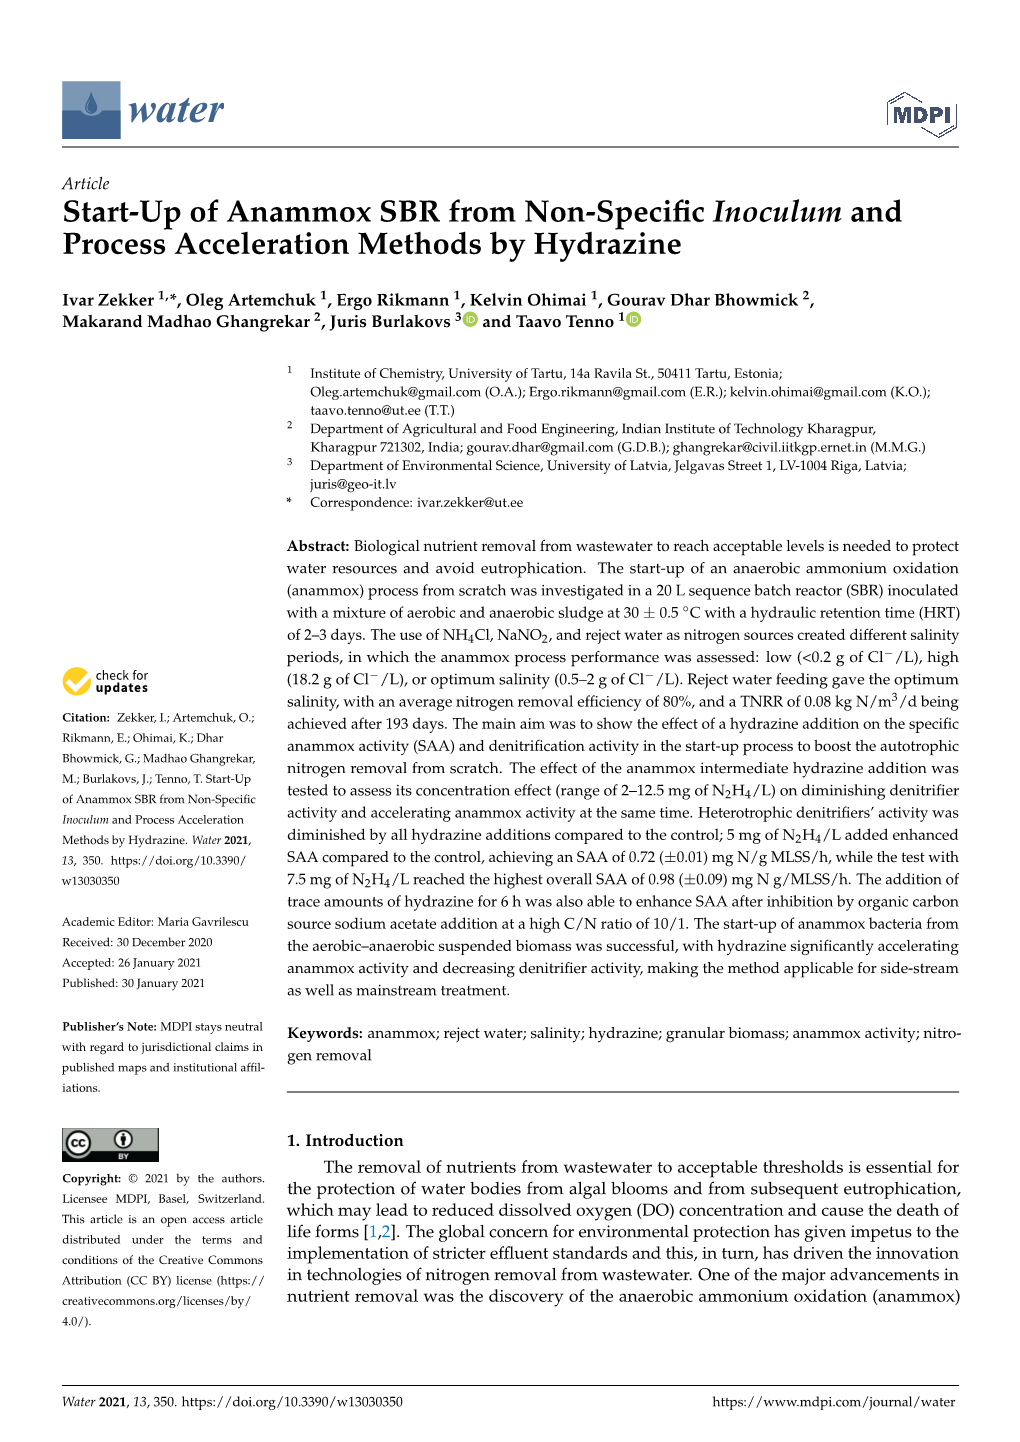 Start-Up of Anammox SBR from Non-Specific Inoculum and Process